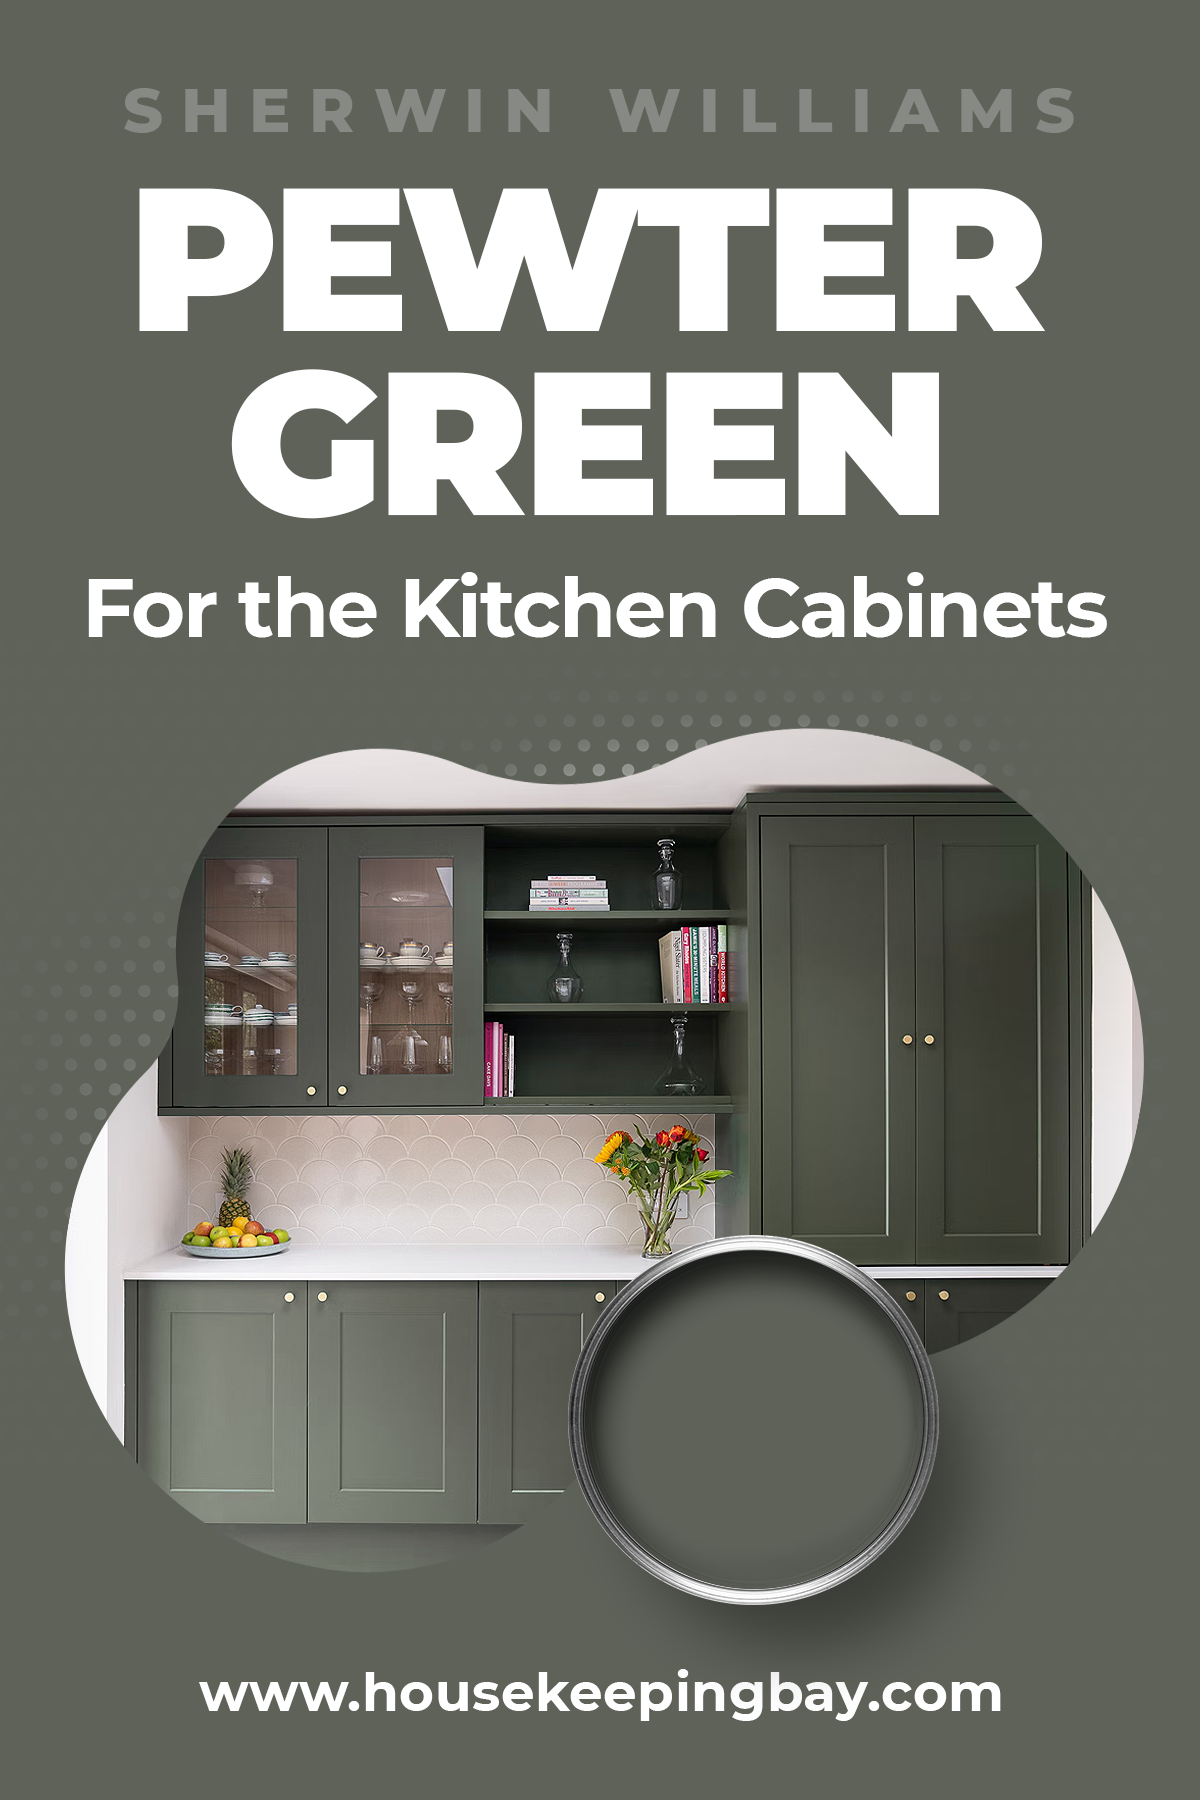 Sherwin Williams Pewter Green for the Kitchen Cabinets